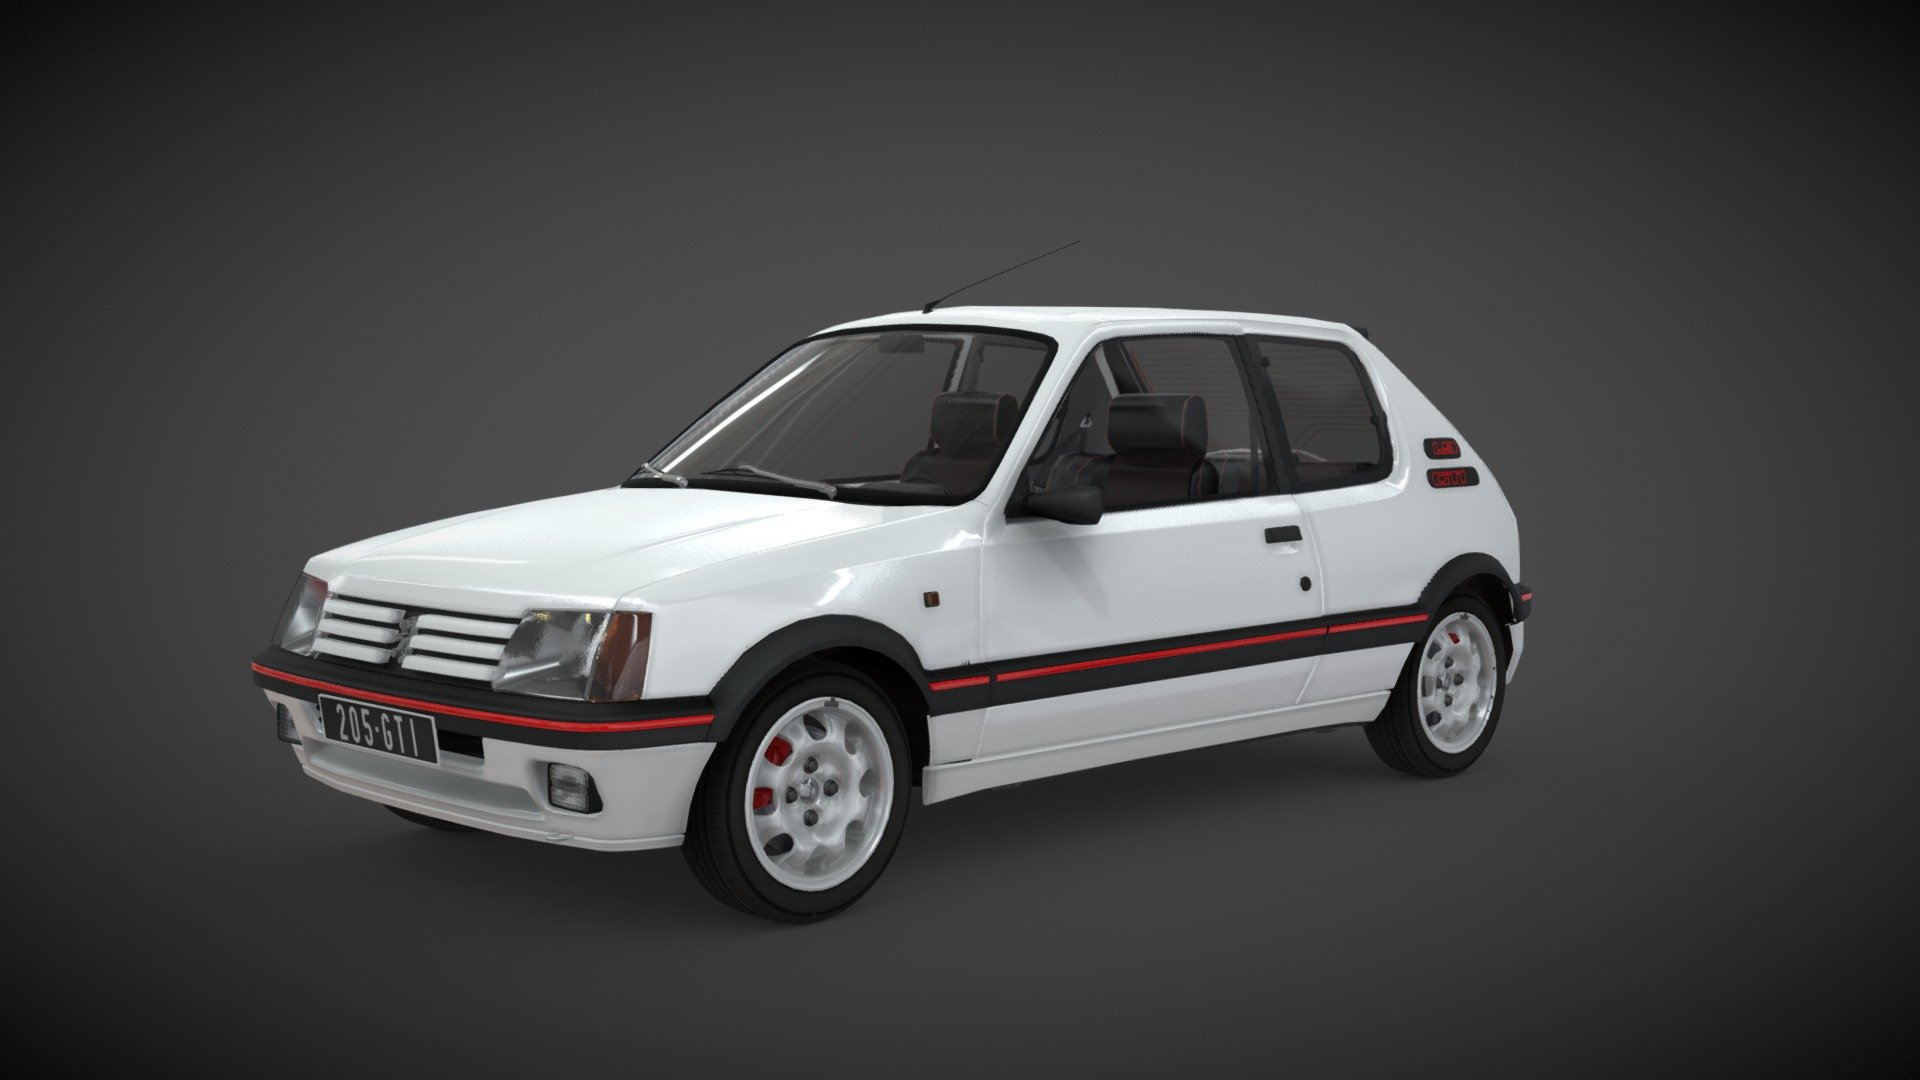 &mdash; 205 gti 1.9 Peugeot :

Reproduction work carried out from reference images only. The model is not a true copy of the original, but is as close as possible to it.
The model is rigged and animated. Everything was modeled with Blender by limiting the number of polygons.

In the archive you would find all the texture in jpeg format. Most of it is made to be tiled. I can send you all my references if it can be useful for you.

The model is ready to be used in a game engine.

Like if you like it and feel free to comment for appreciation or any suggestions.
If you want to download it, feel free to contact me for more information.

Please consider crediting me. It will be nice to link to my Web site. Thank you !

ArtStation project here : https://www.artstation.com/artwork/zDlNed - Peugeot 205 gti car game ready - Buy Royalty Free 3D model by sudermann 3d model